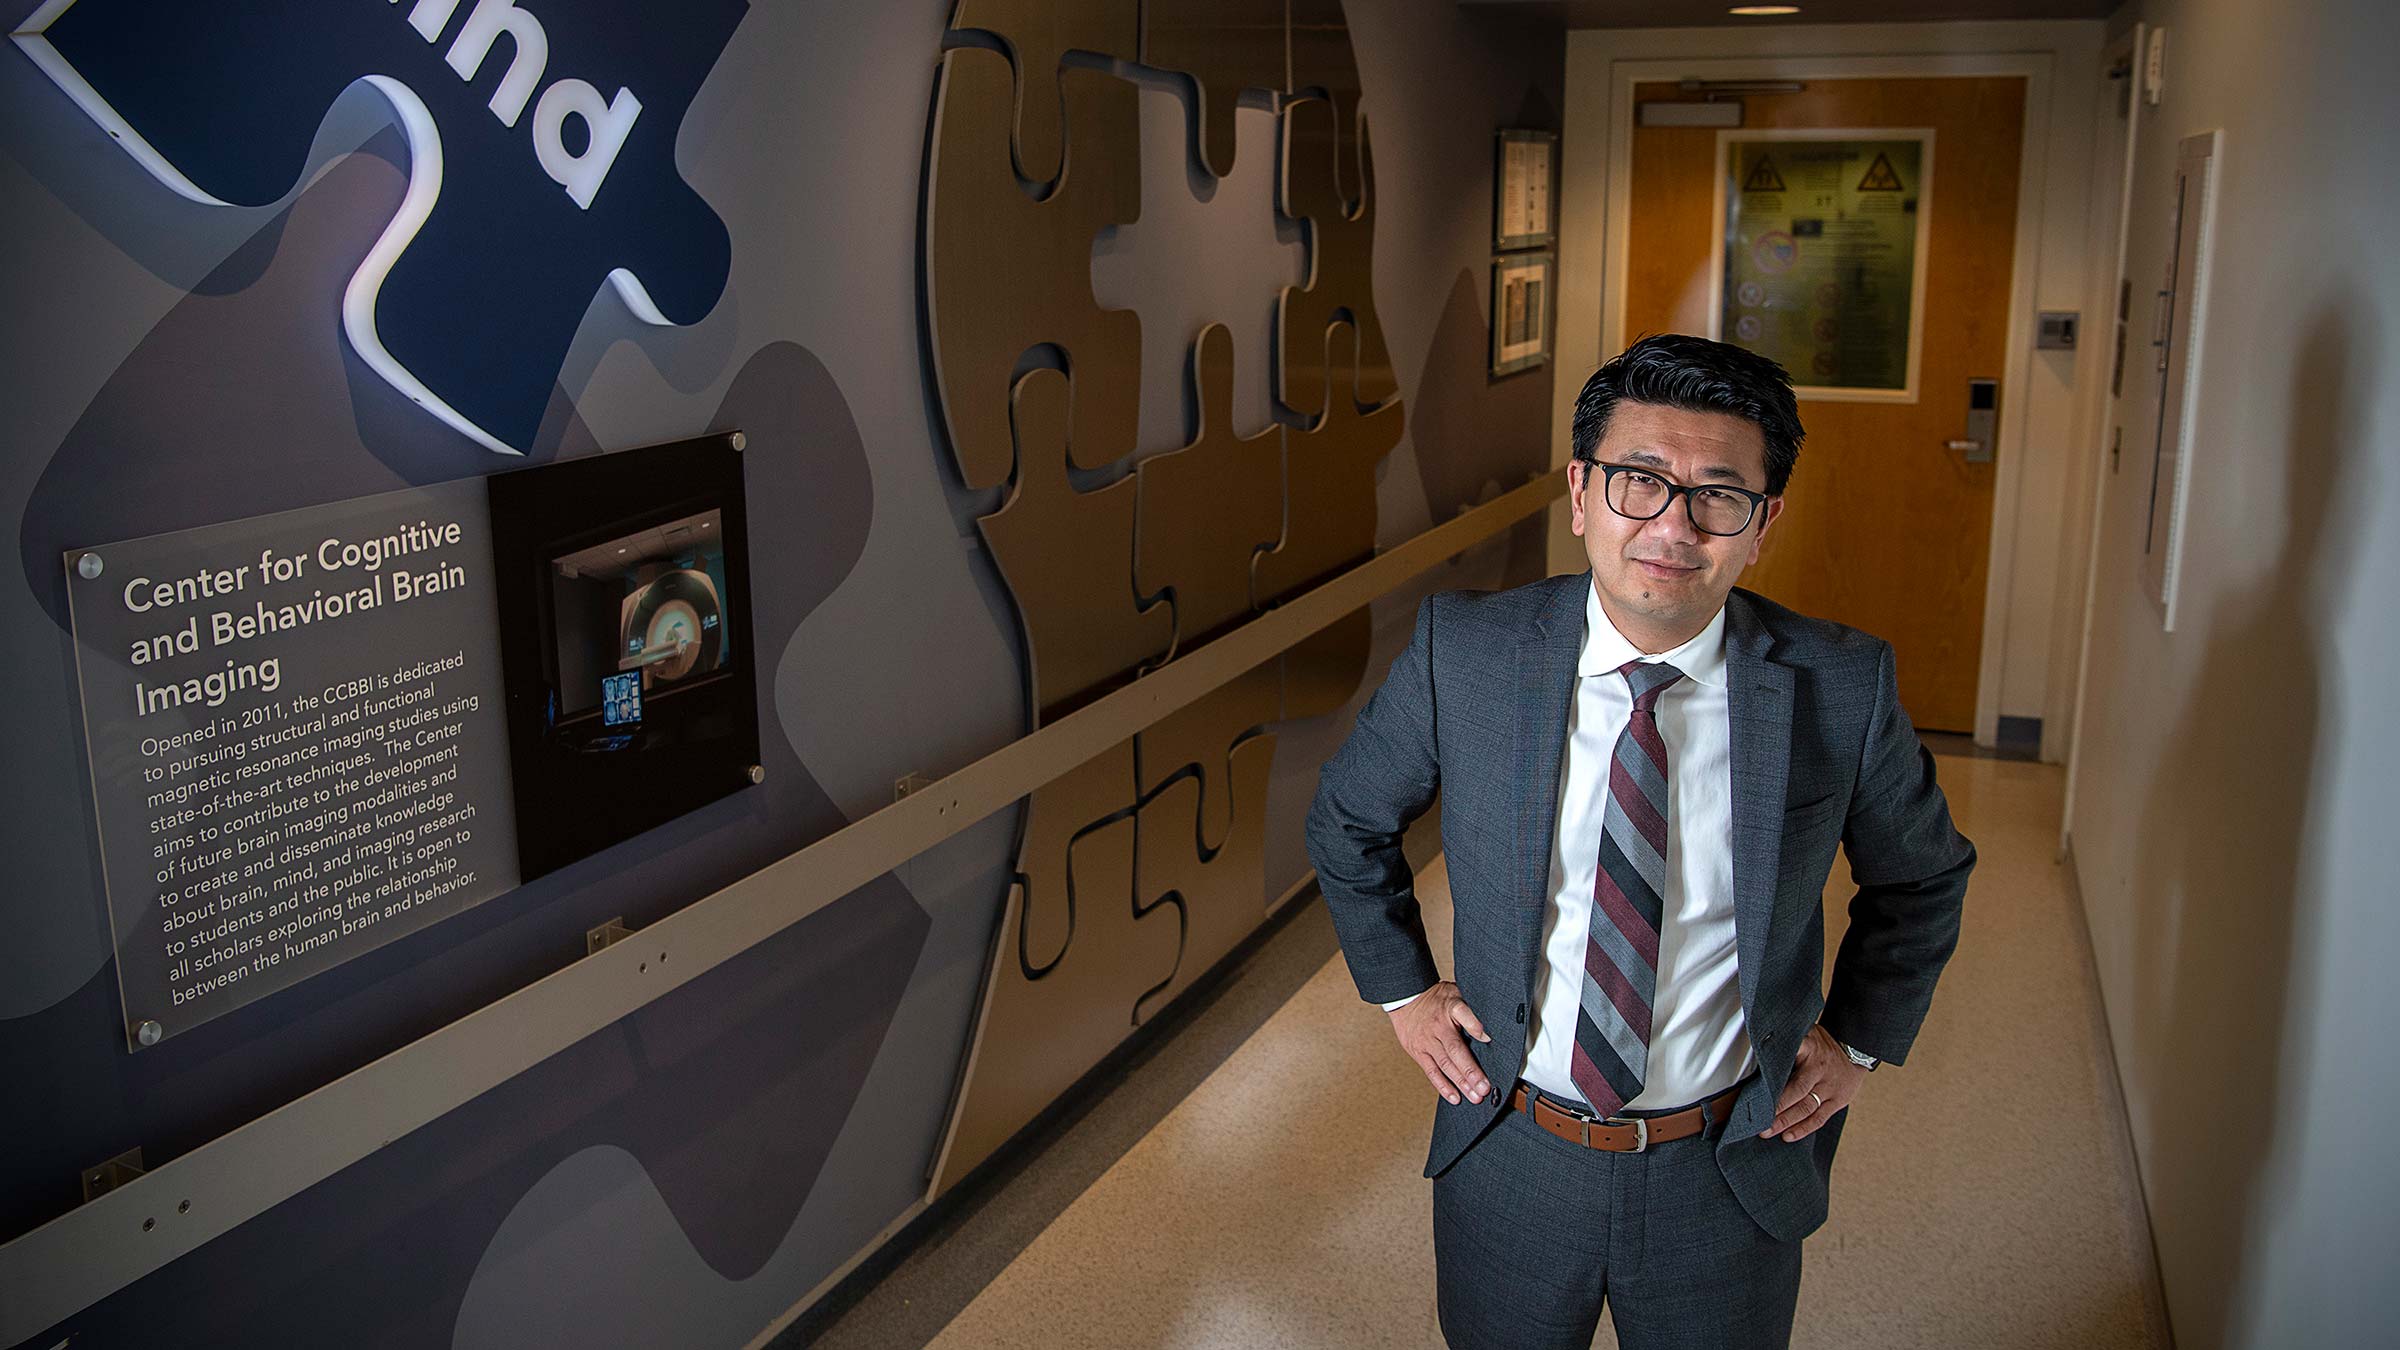 Dr. K. Laun Phan, MD in the hallway leading to the Center for Cognitive and Behavioral Brain Imaging